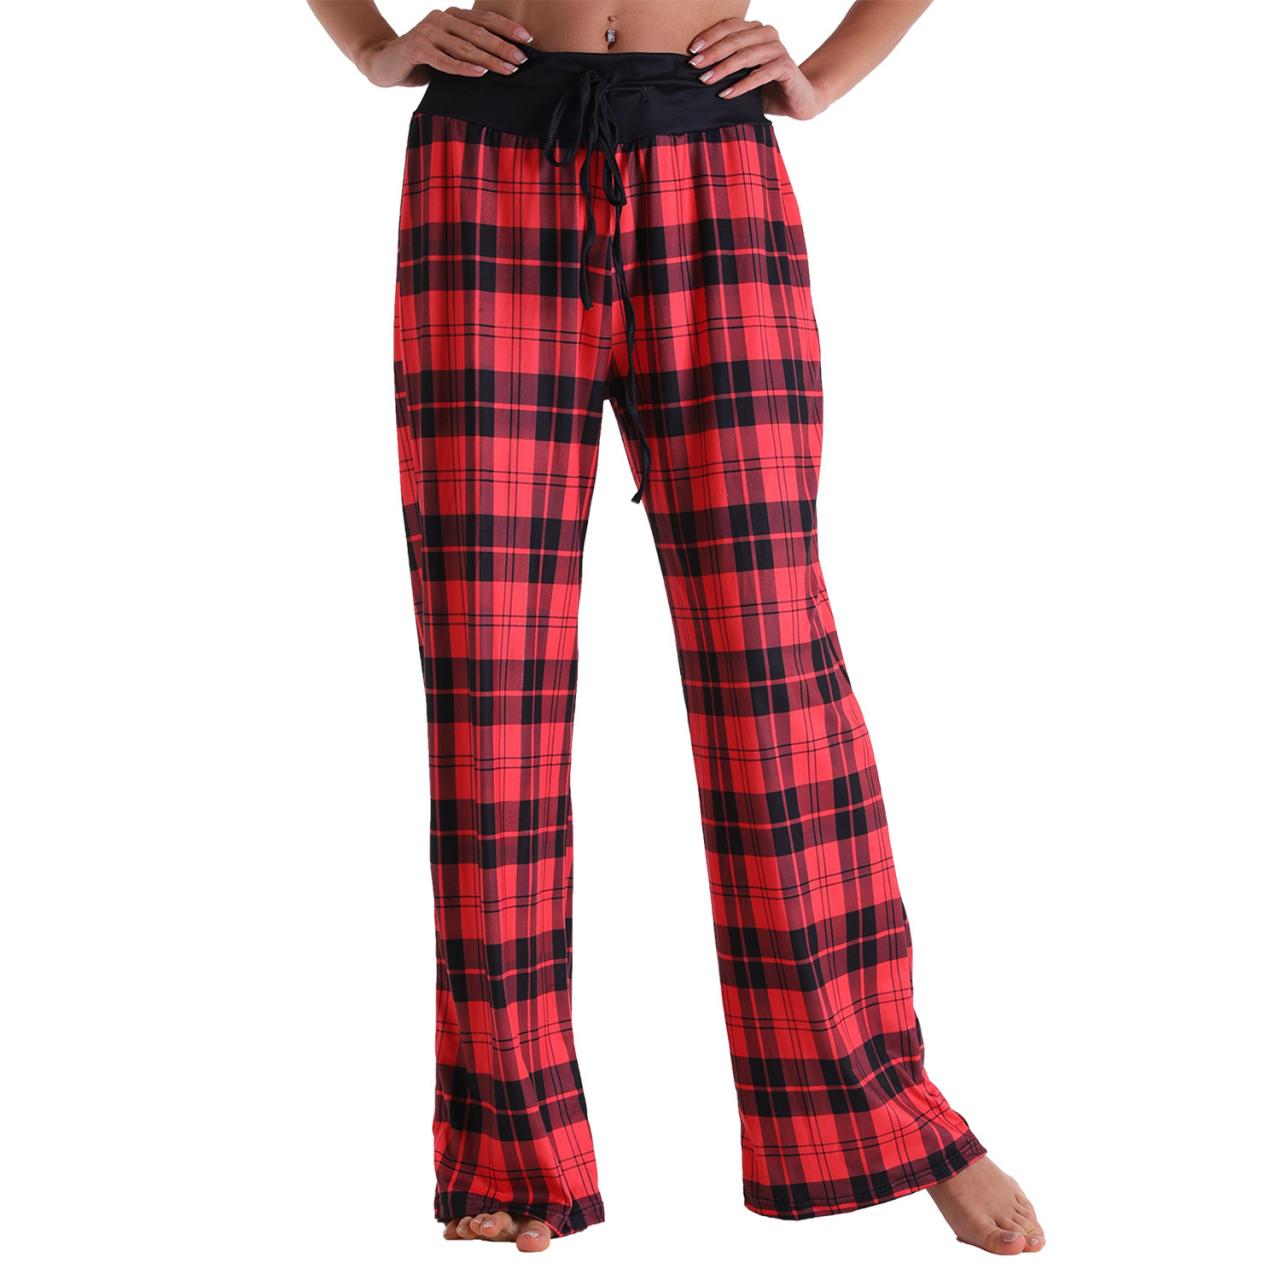 Leisure Sports Yoga Women Casual Pajamas Elastic Pocket Trousers Loose Fit Strap Red Color Plaid Pants